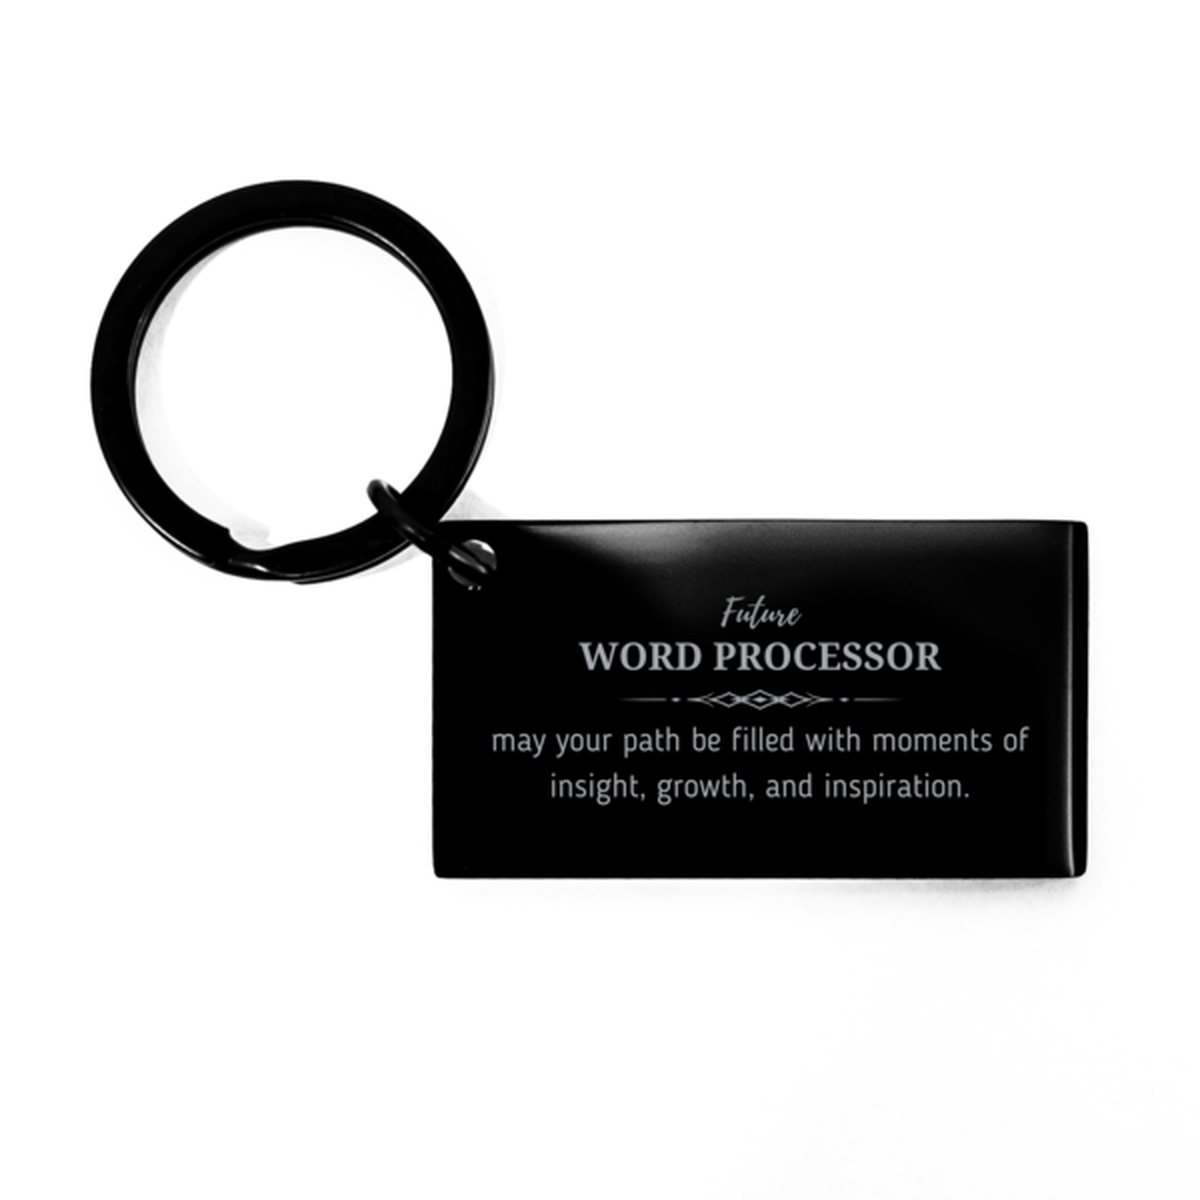 Future Word Processor Gifts, May your path be filled with moments of insight, Graduation Gifts for New Word Processor, Christmas Unique Keychain For Men, Women, Friends